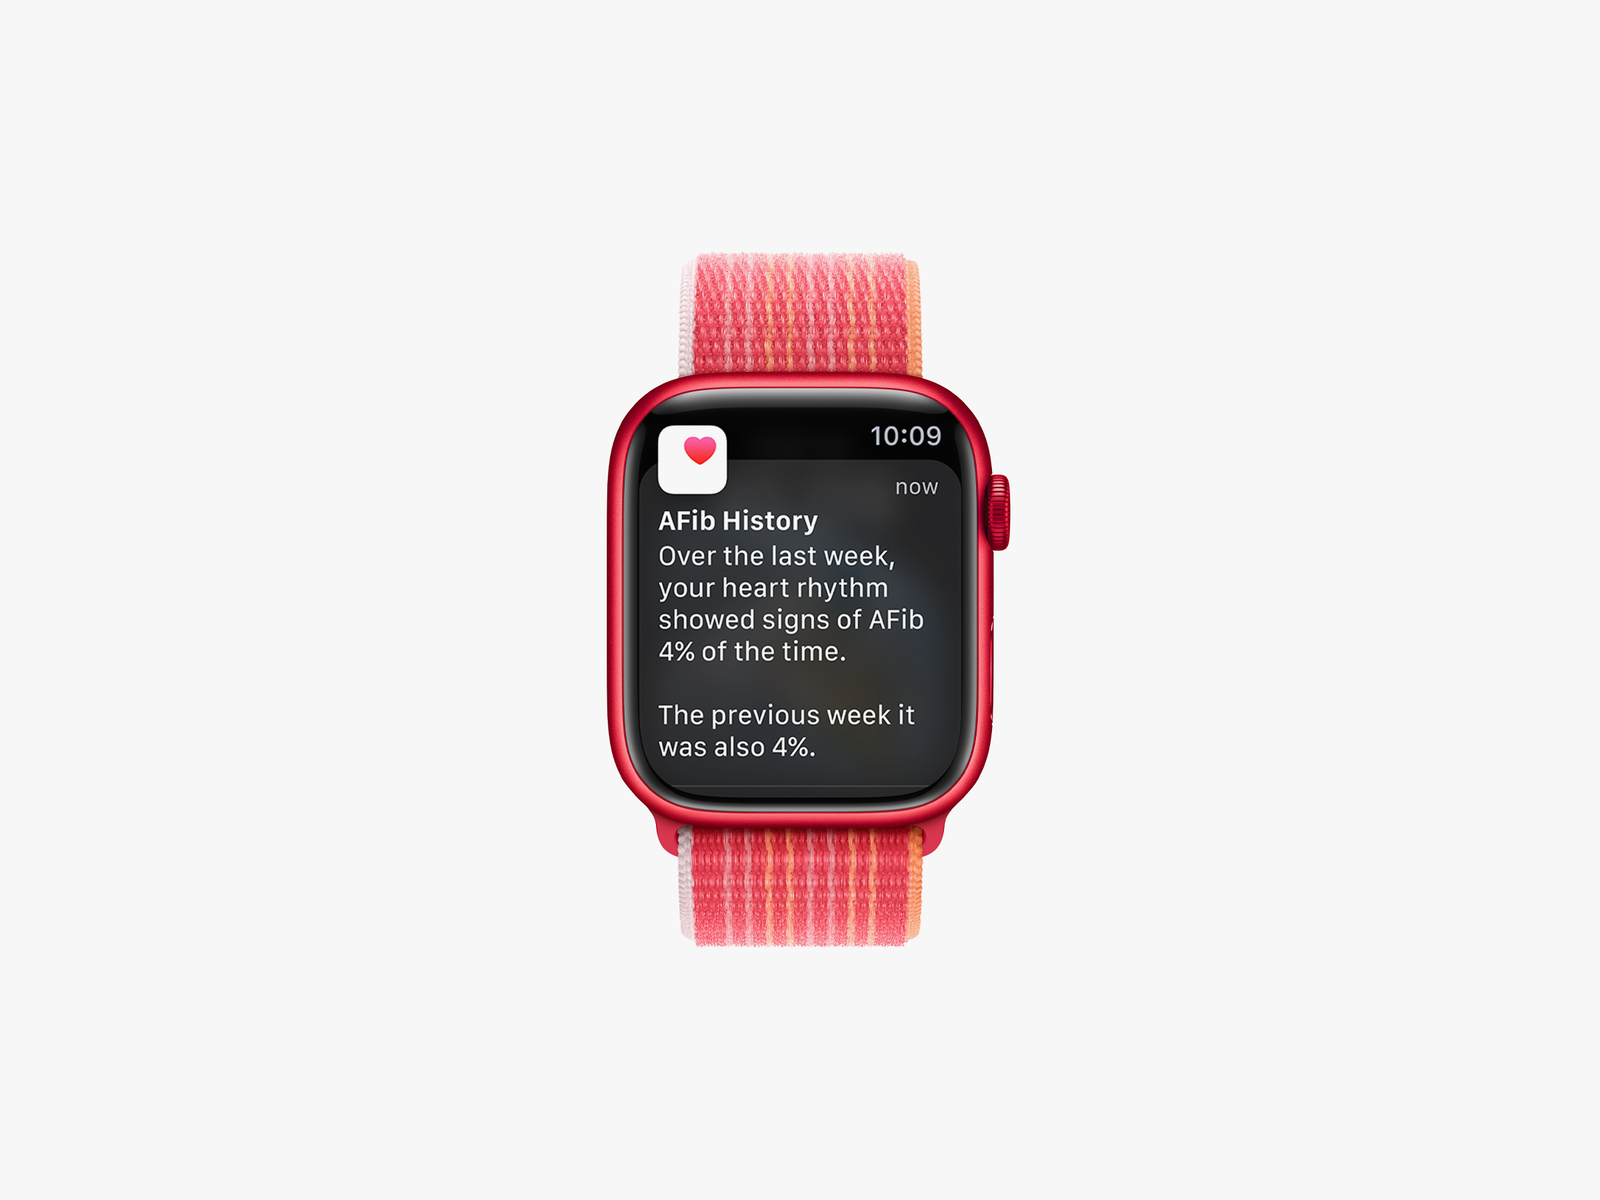 Apple Watch showing AFiB history